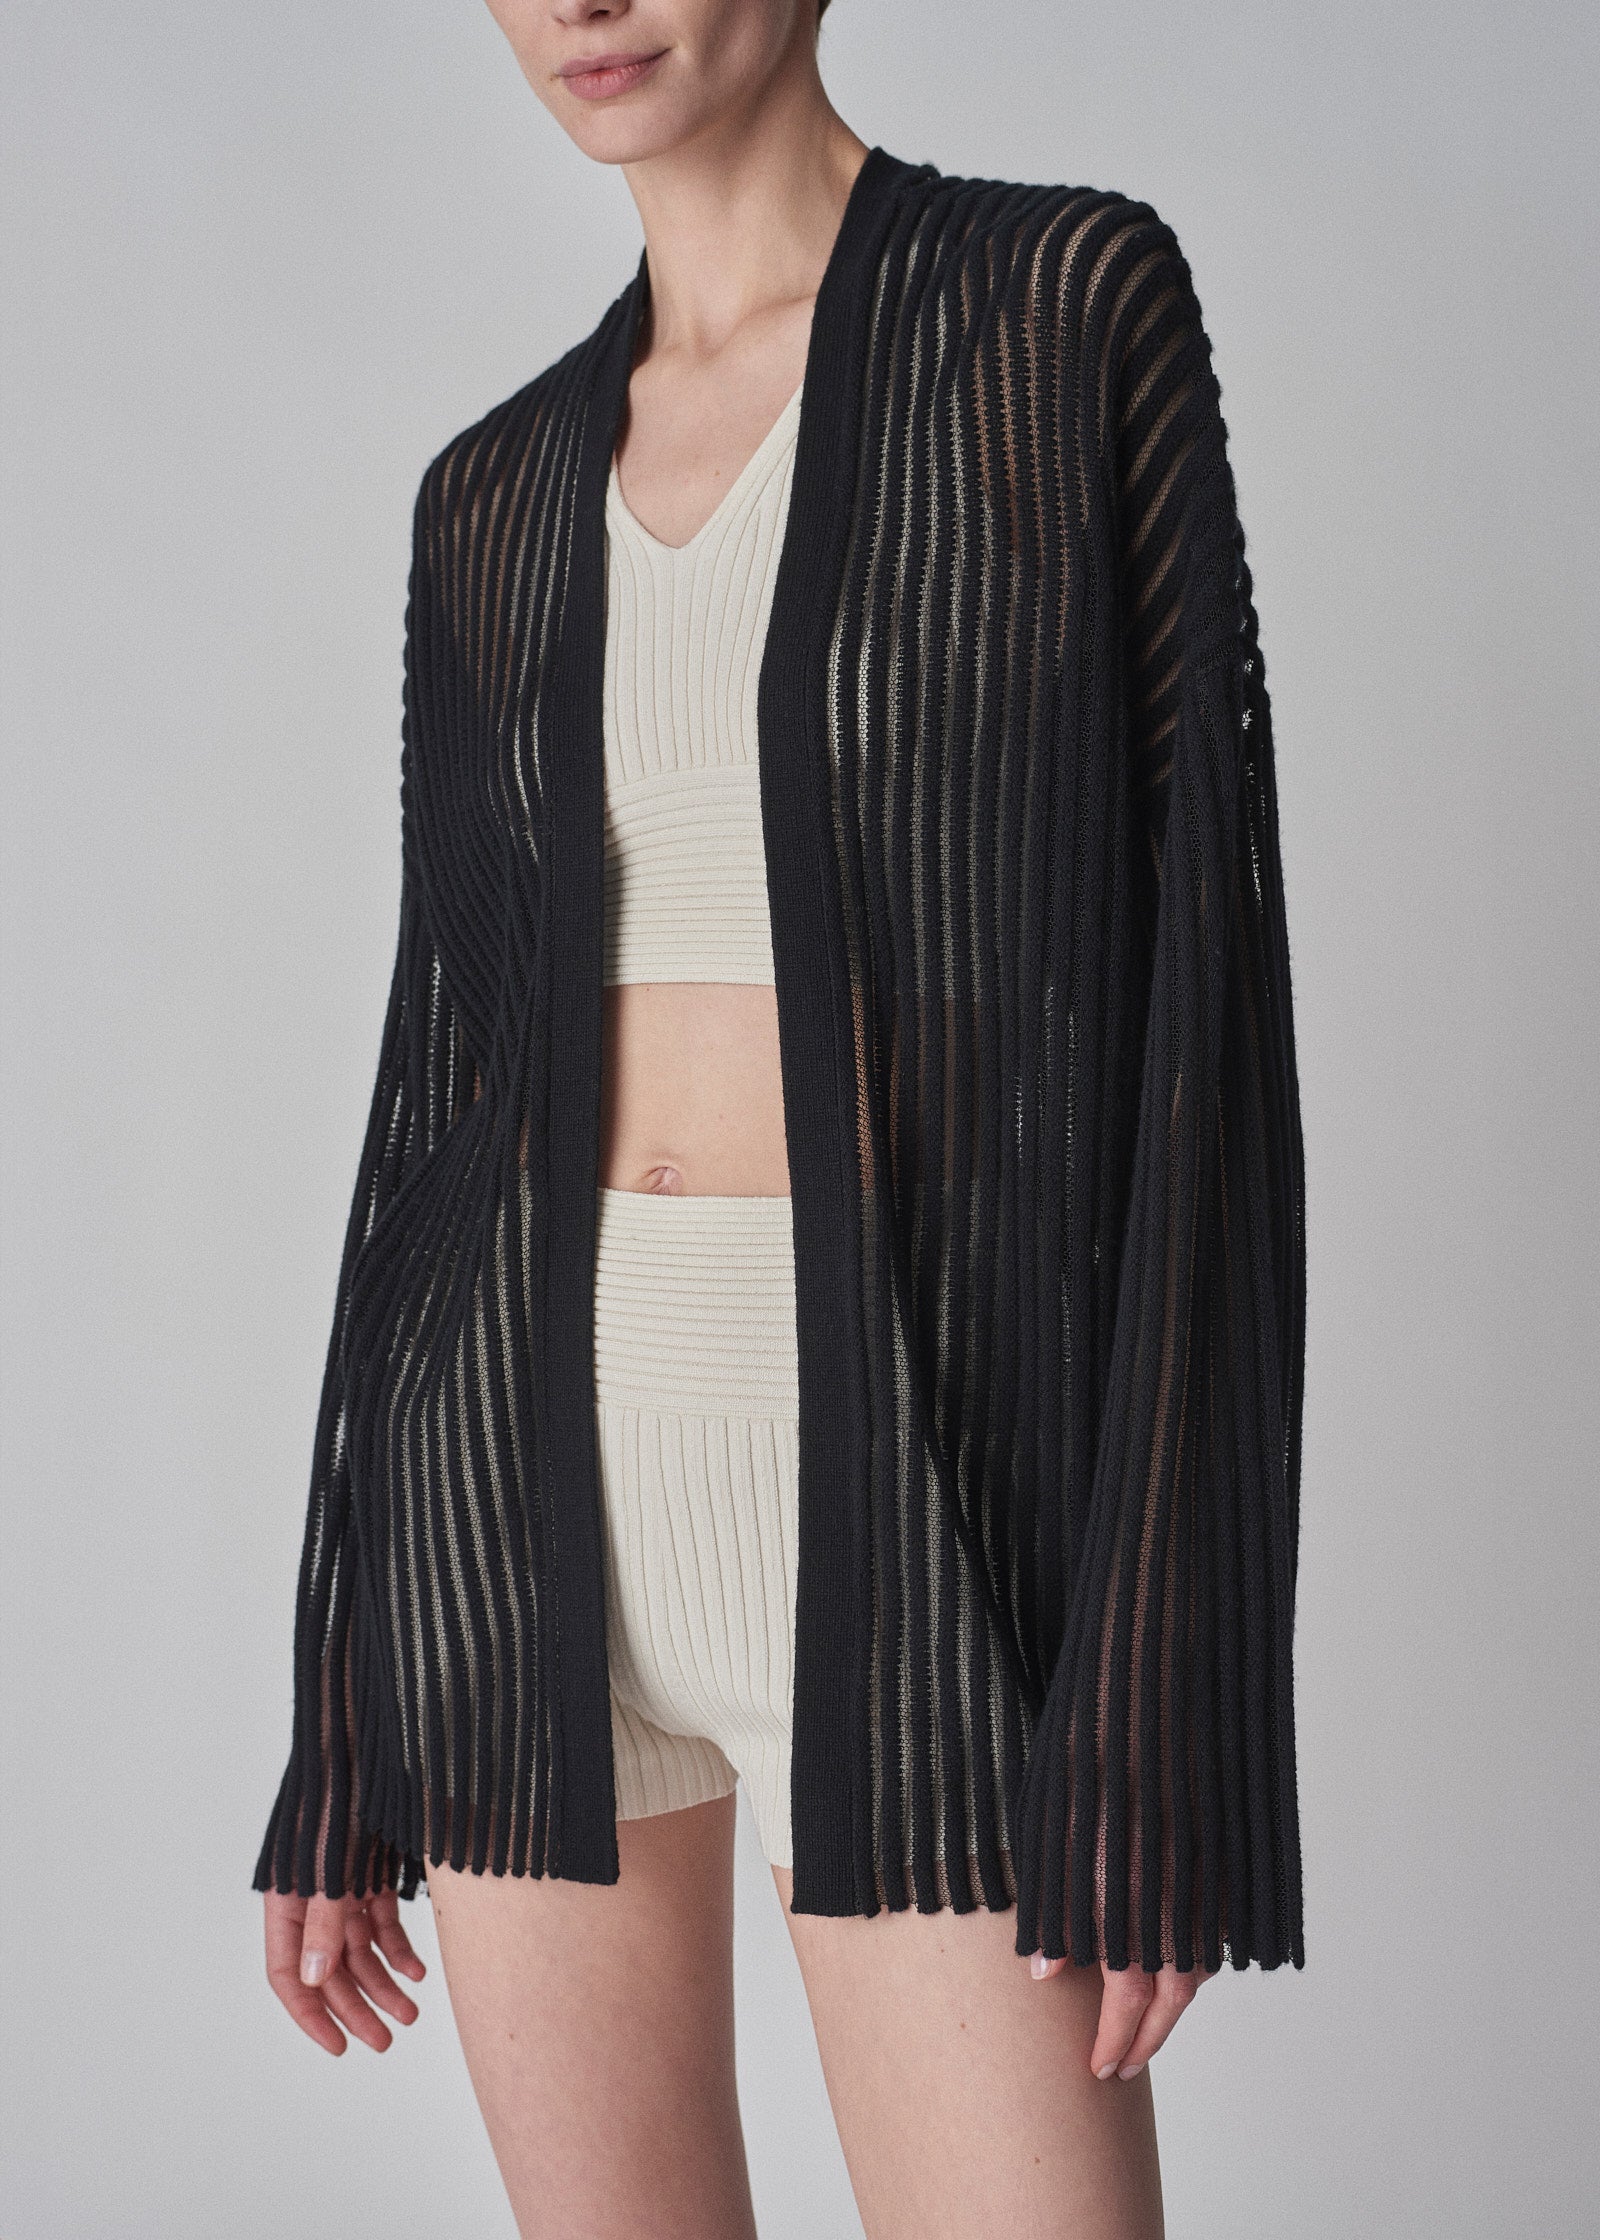 Cardigan in Cashmere Silk Knit- Black - CO Collections